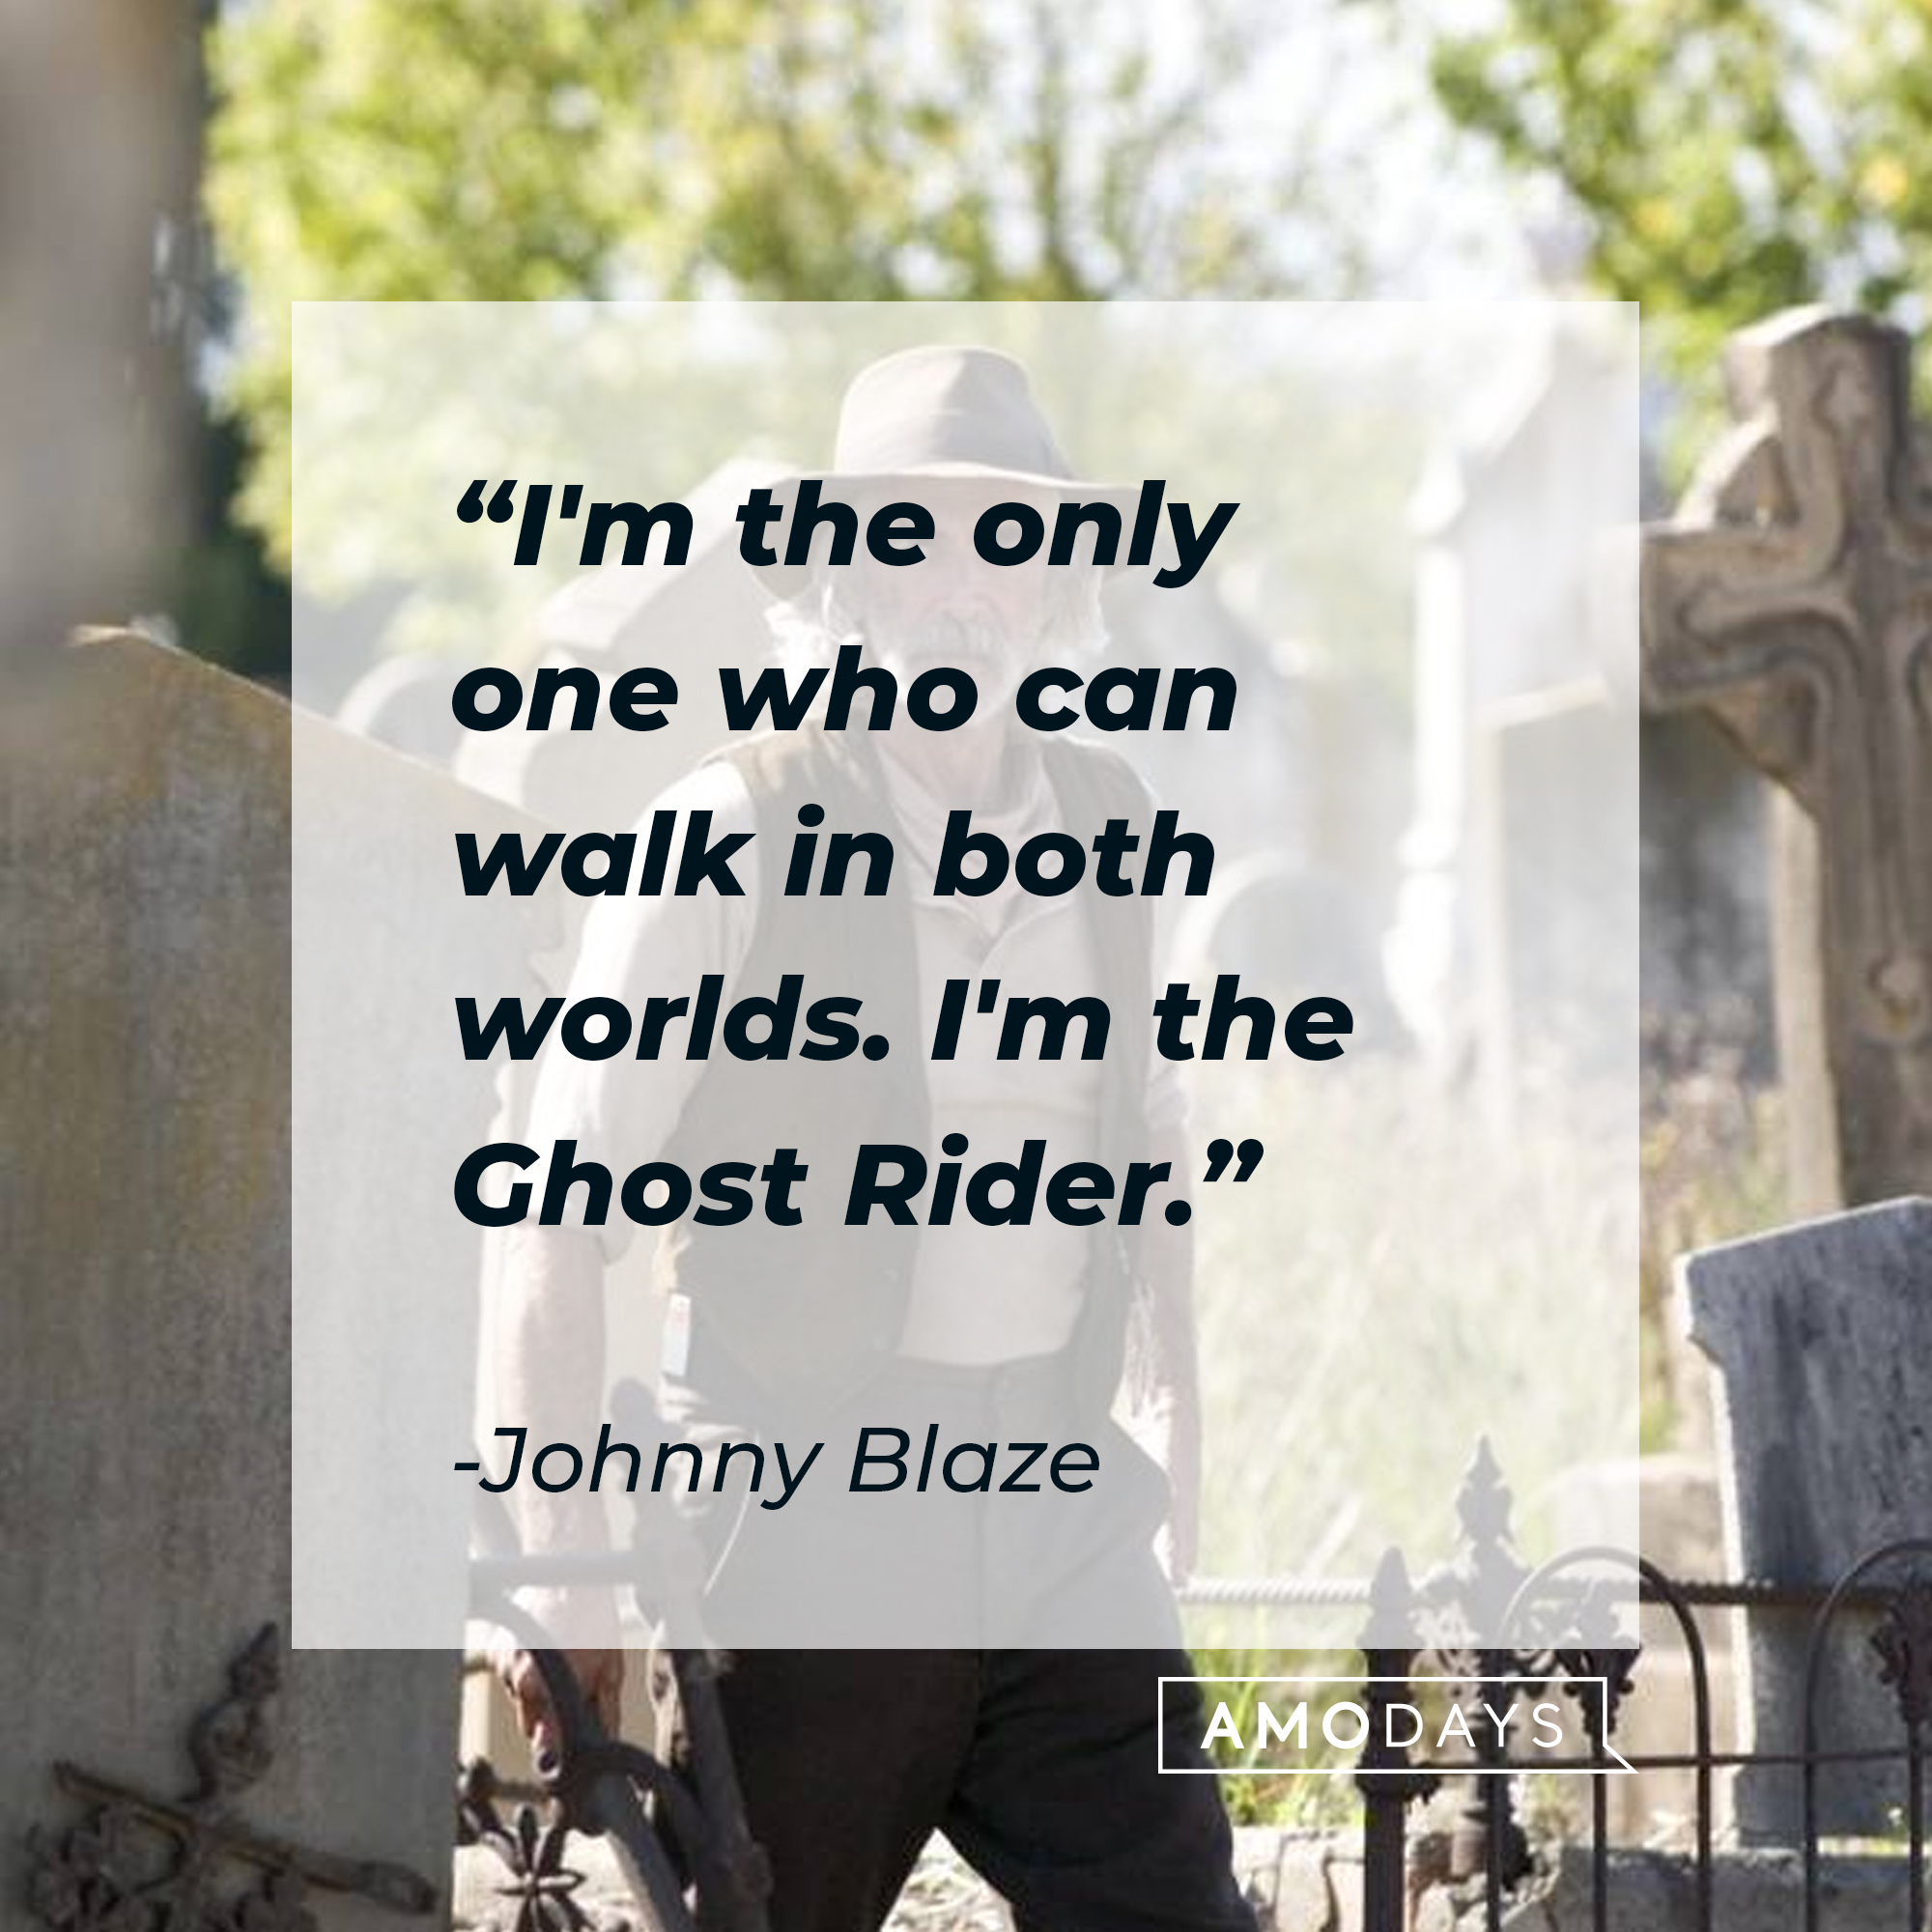 Johnny Blaze's quote: "I'm the only one who can walk in both worlds. I'm the Ghost Rider." | Source: facebook.com/ghostridermovie